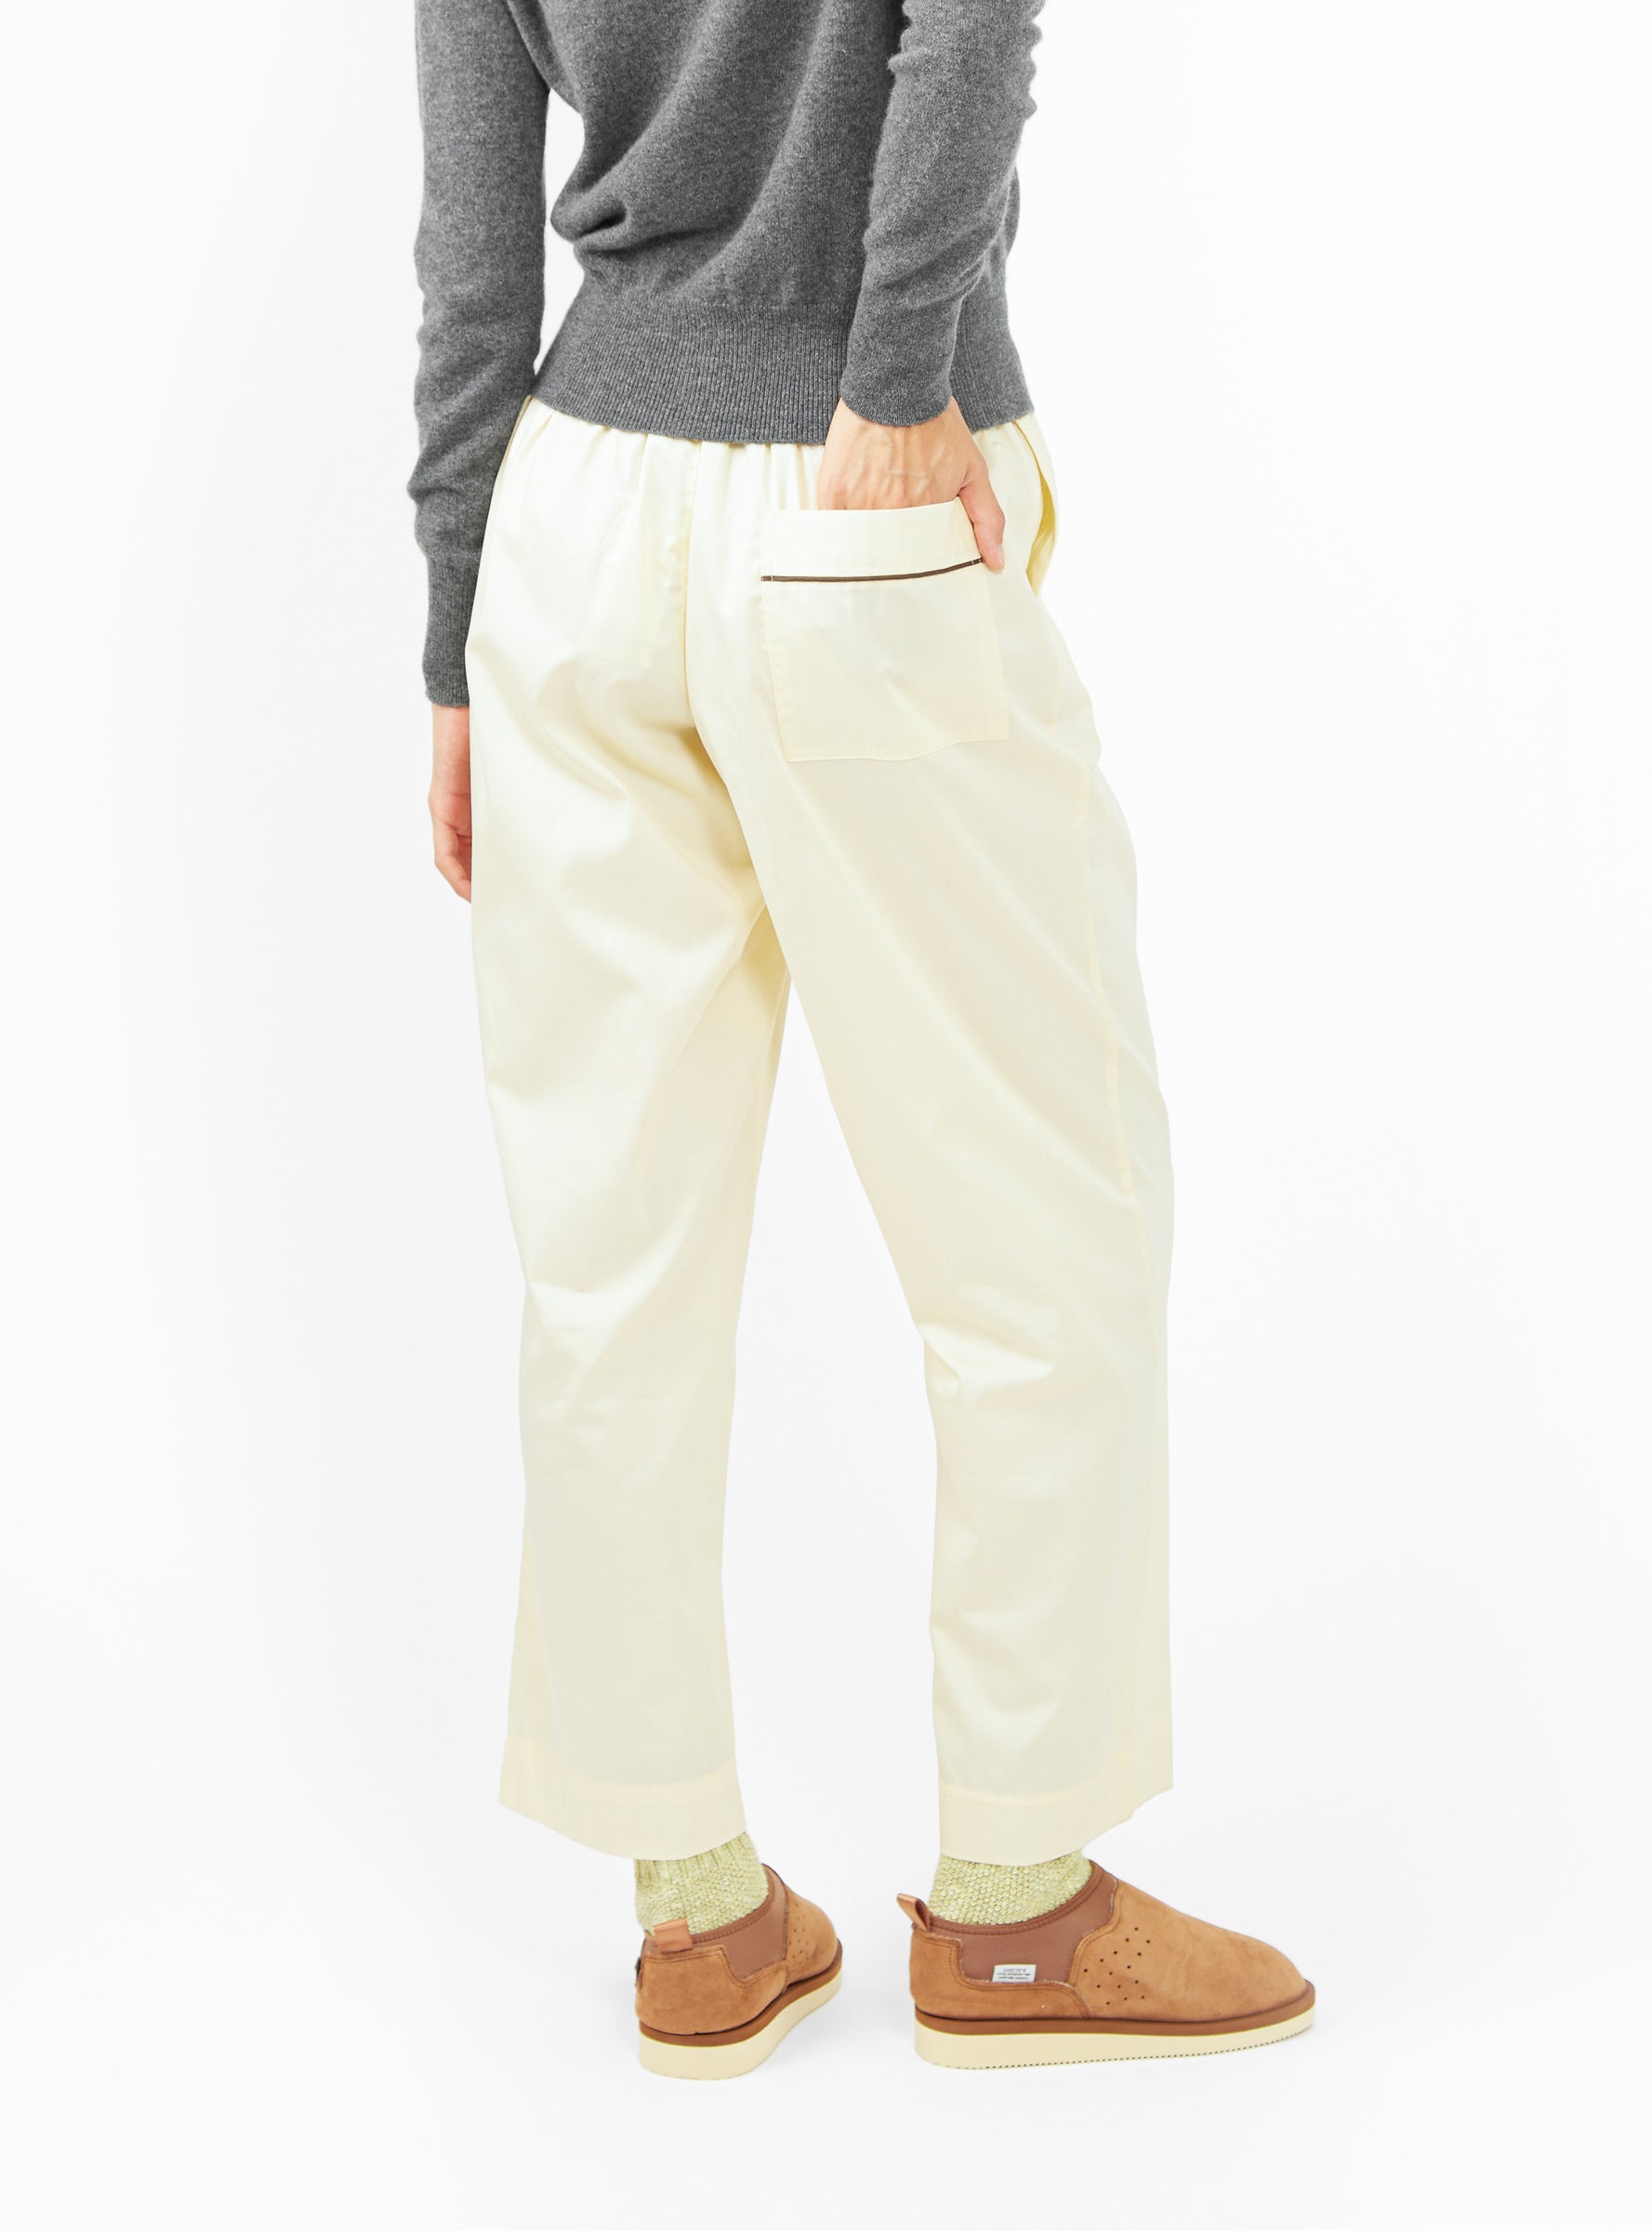  Hay Outline Pyjama Trousers Yellow - Size: M/L